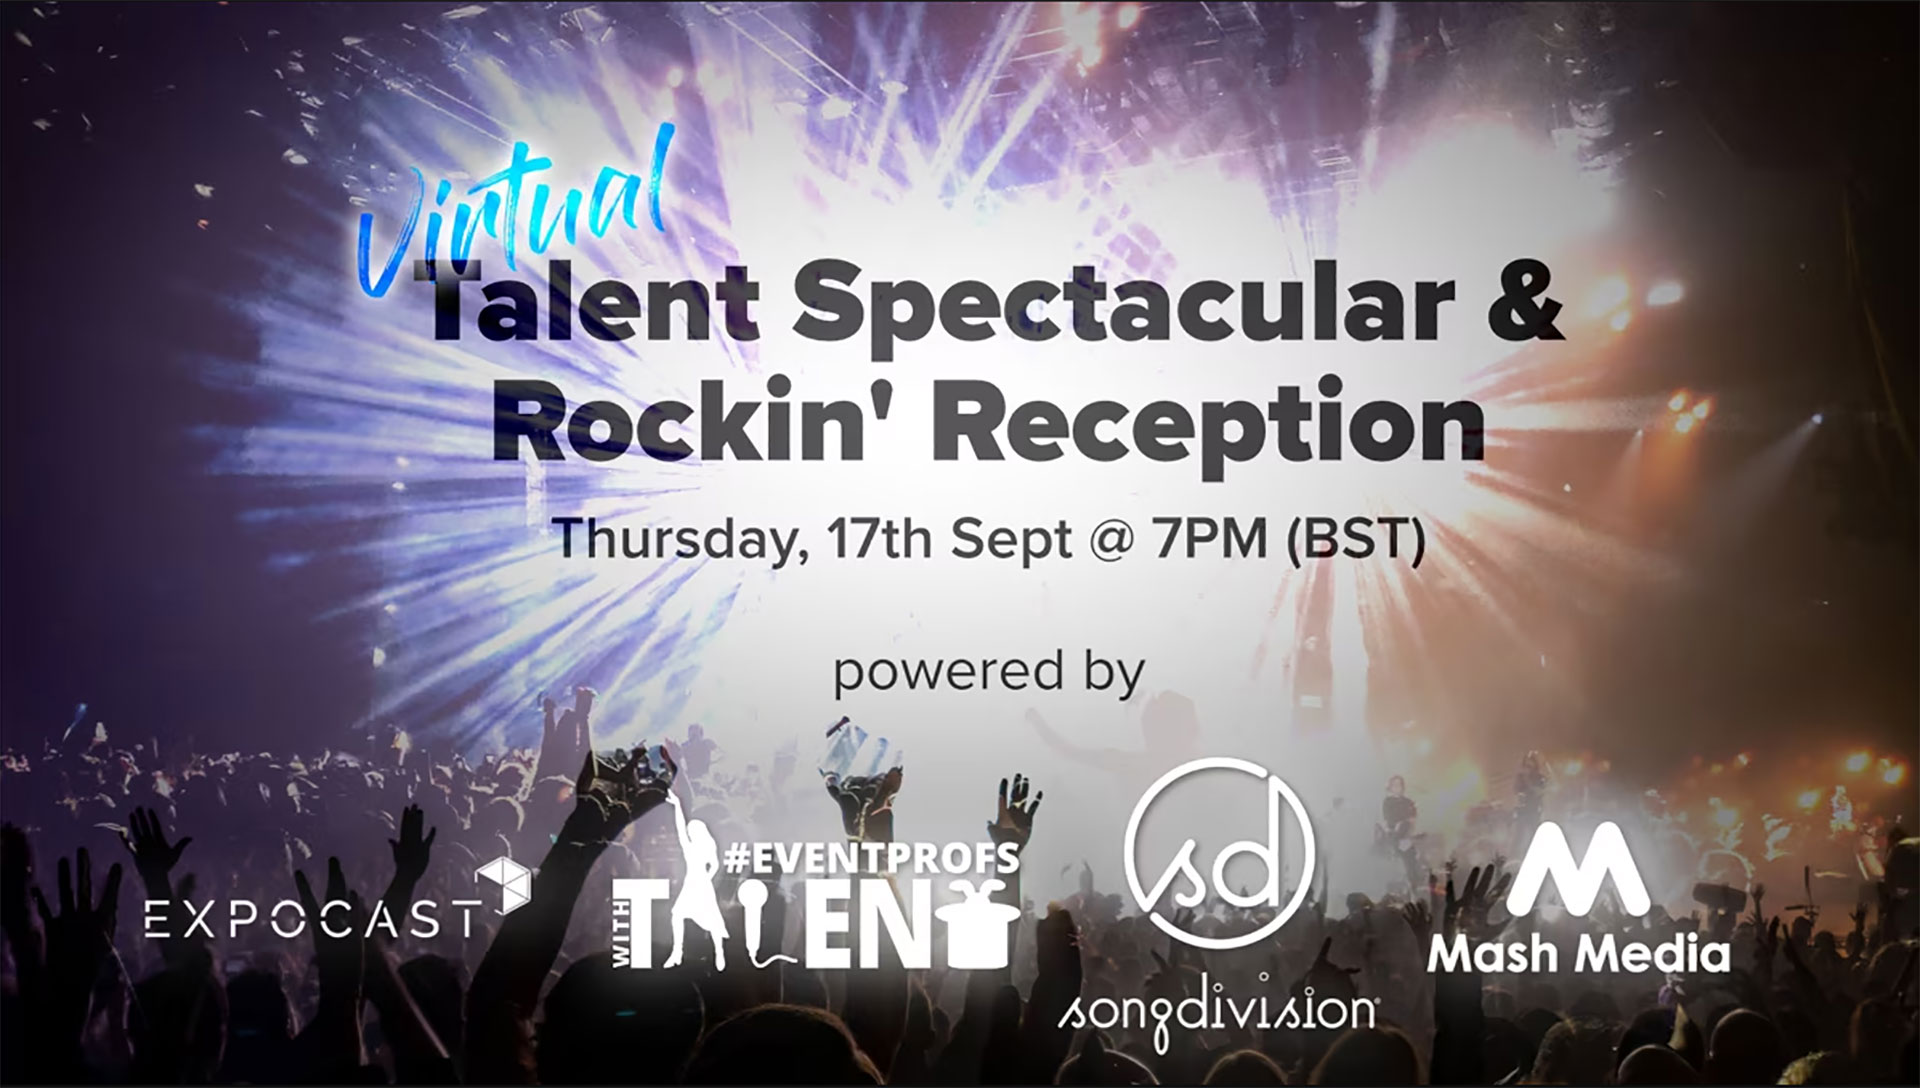 #EventProfs: Virtual Talent Spectacular & Rockin’ Reception with SongDivision